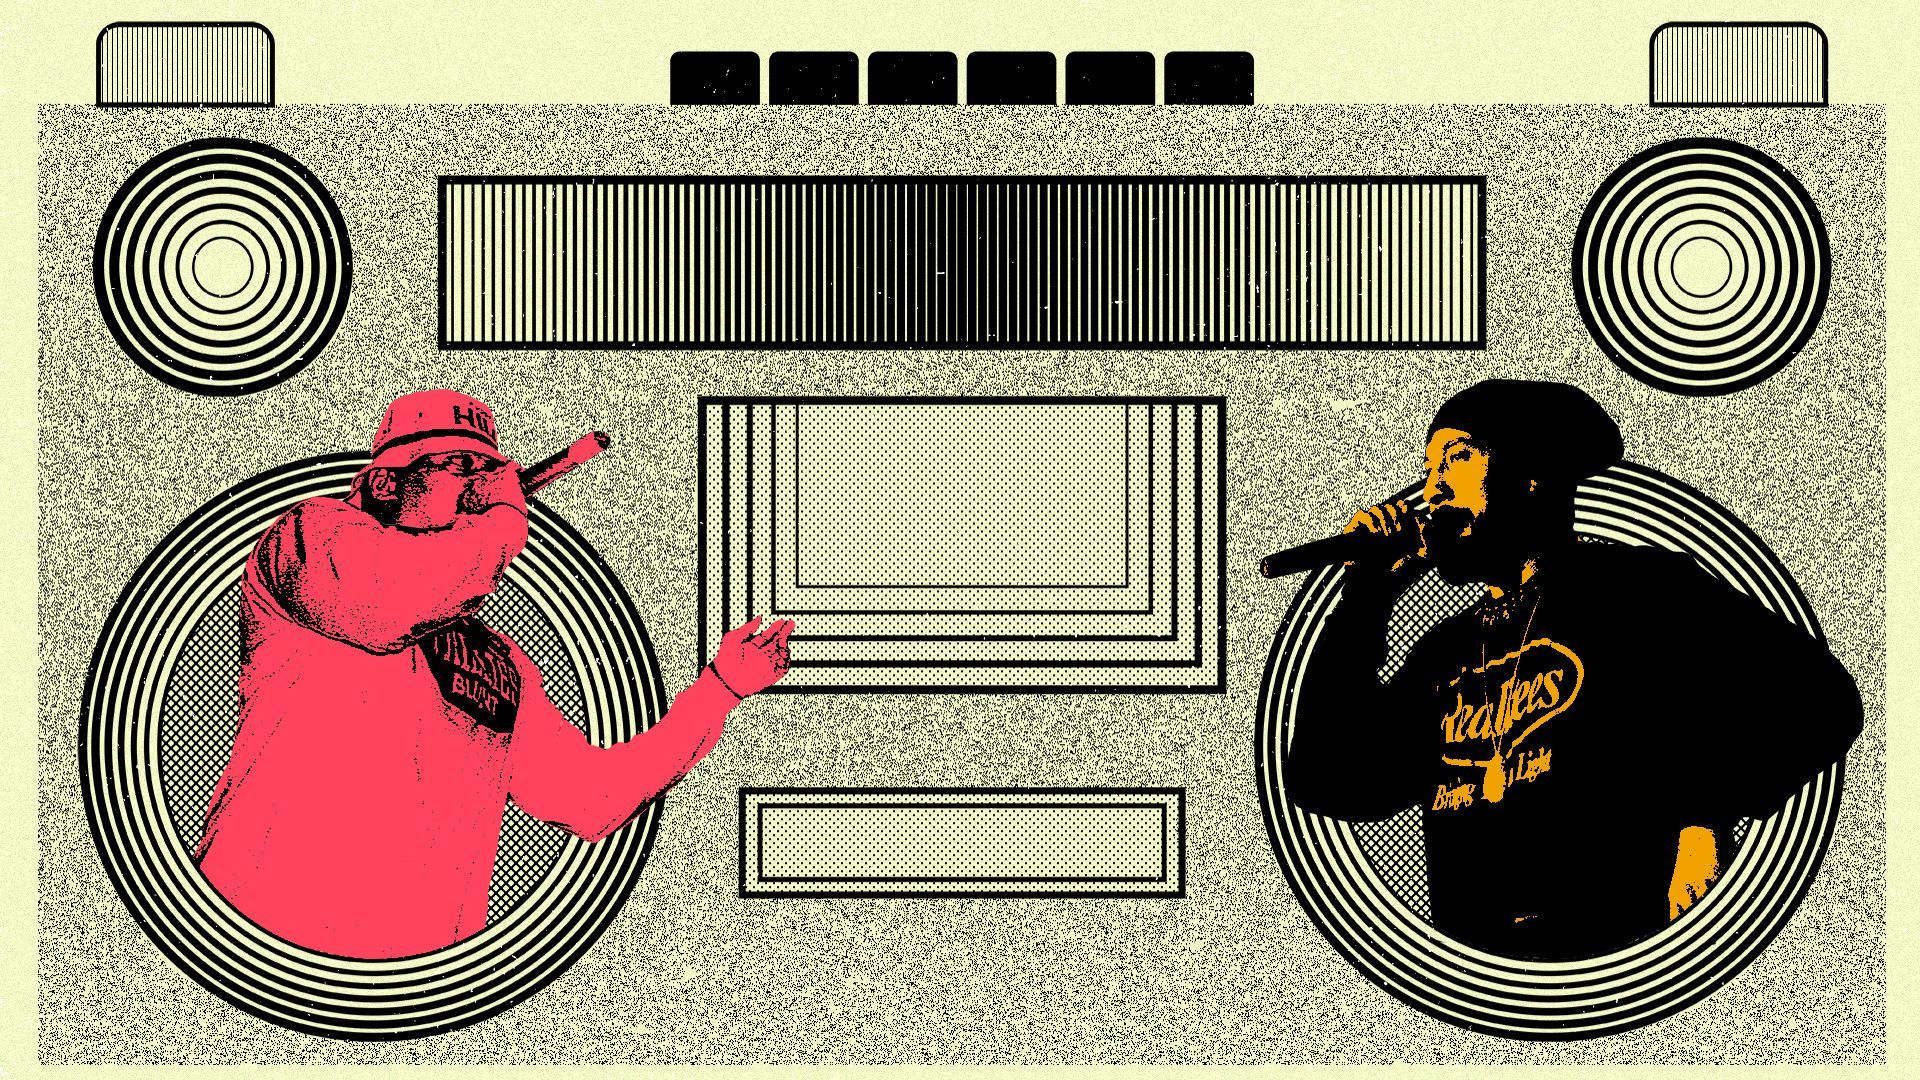 Photo illustration of Sen Dog and B-Real of Cypress Hill over a boombox design resembling an early hip-hop concert flyer.